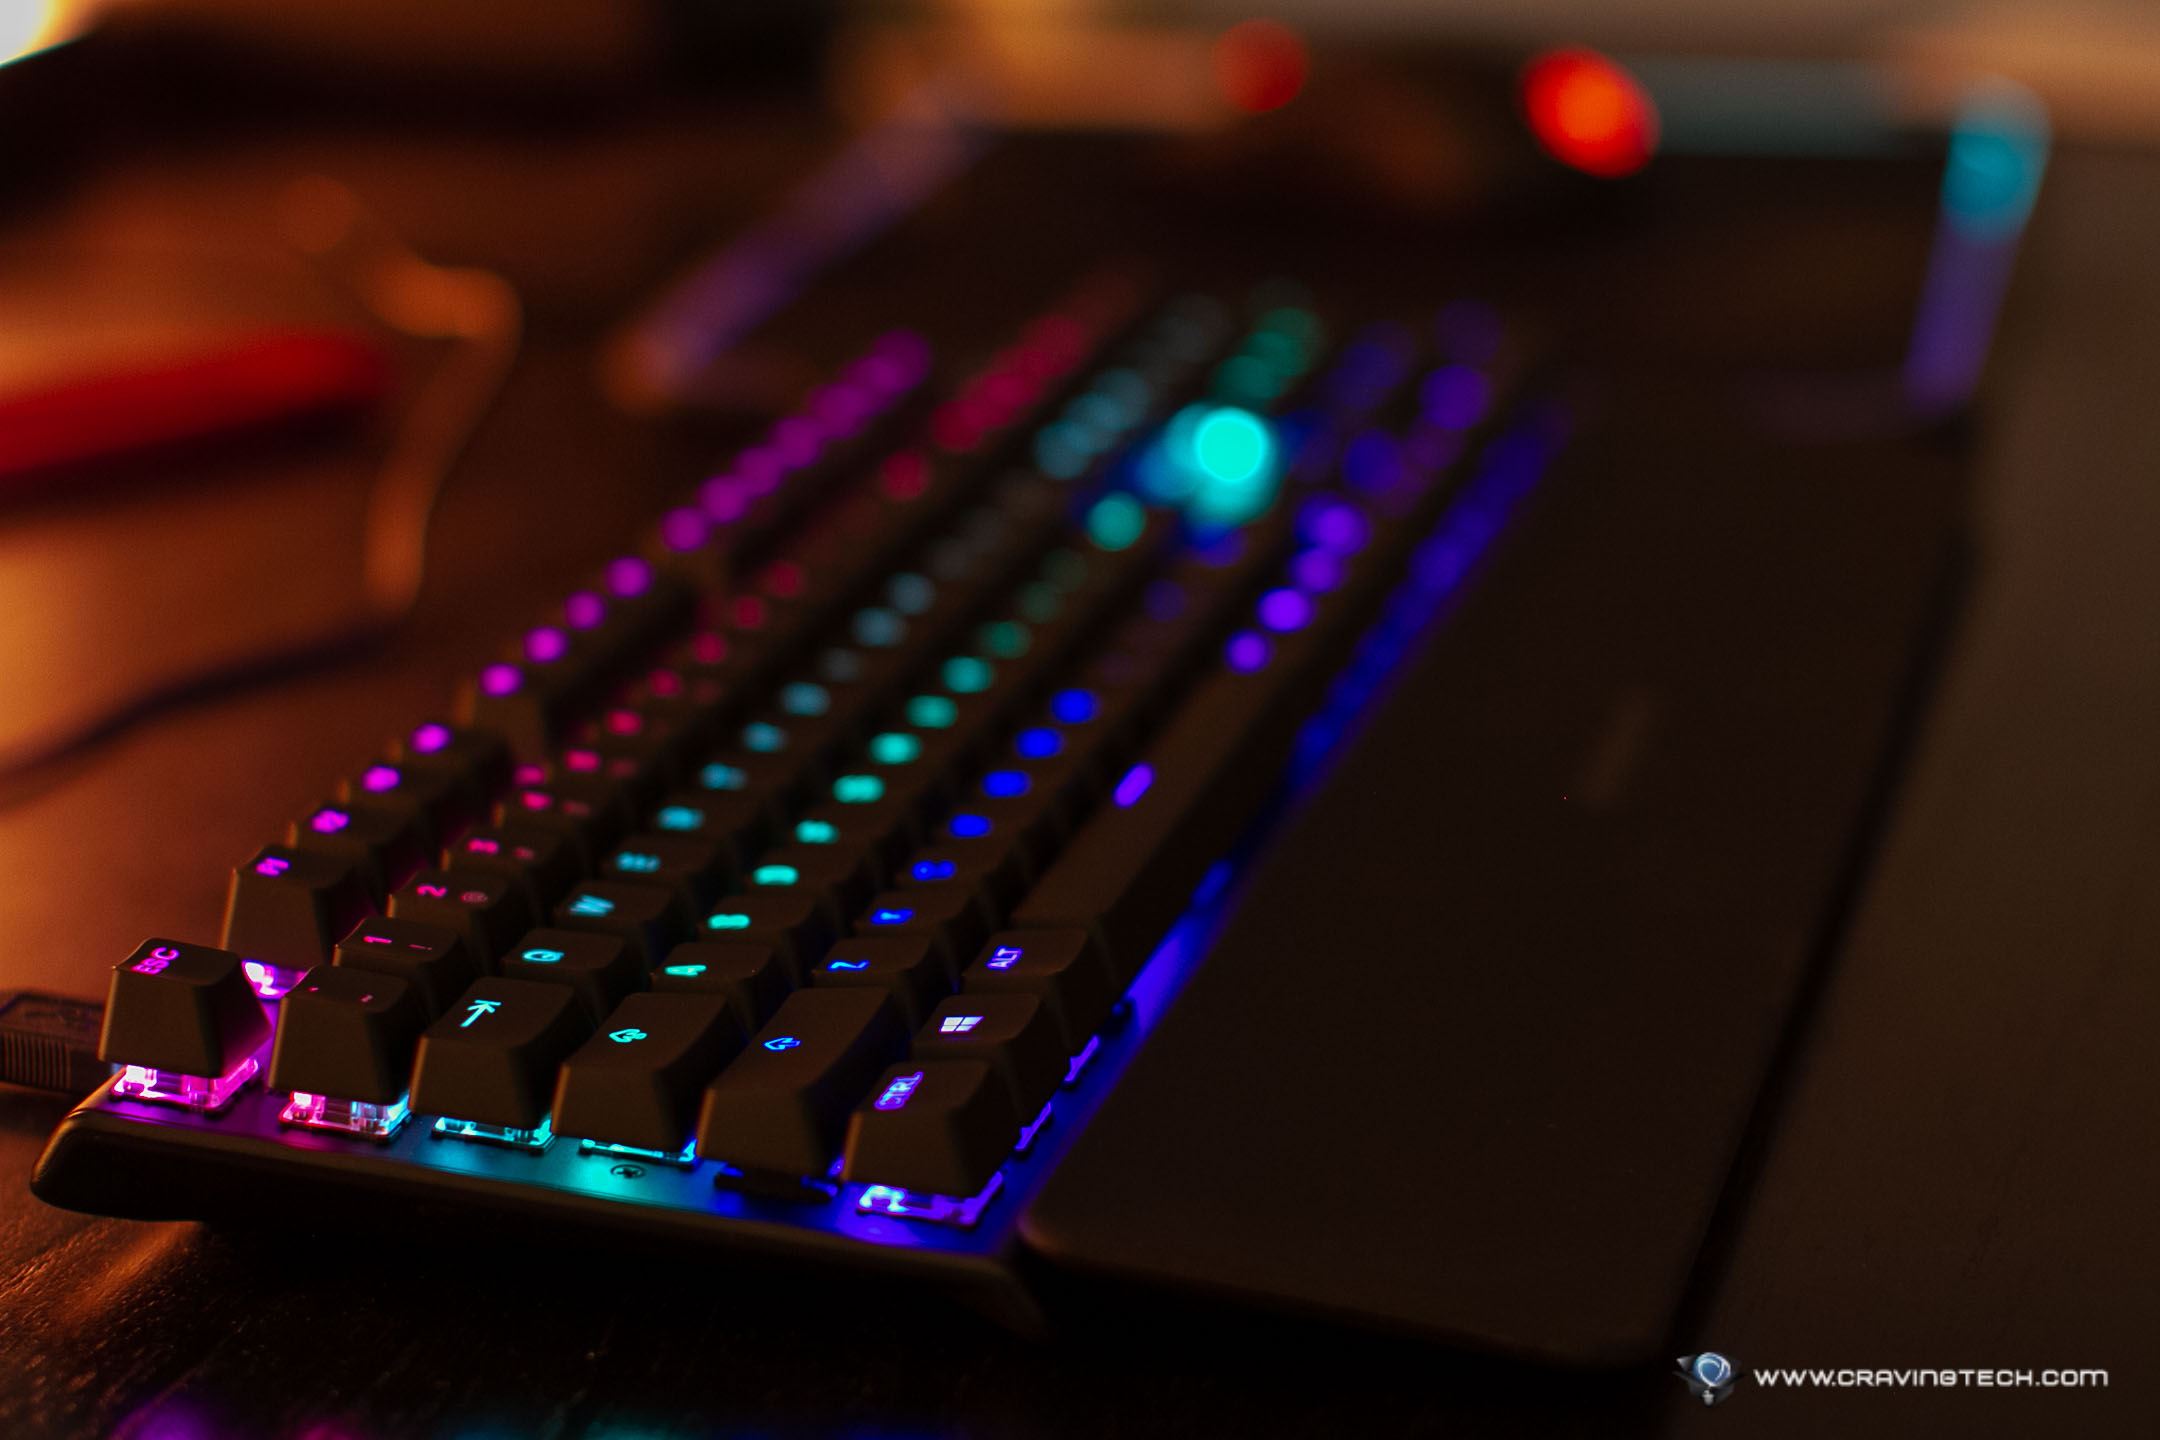 Fastest, most adjustable mechanical gaming keyboard in the market? – SteelSeries Apex Pro Review